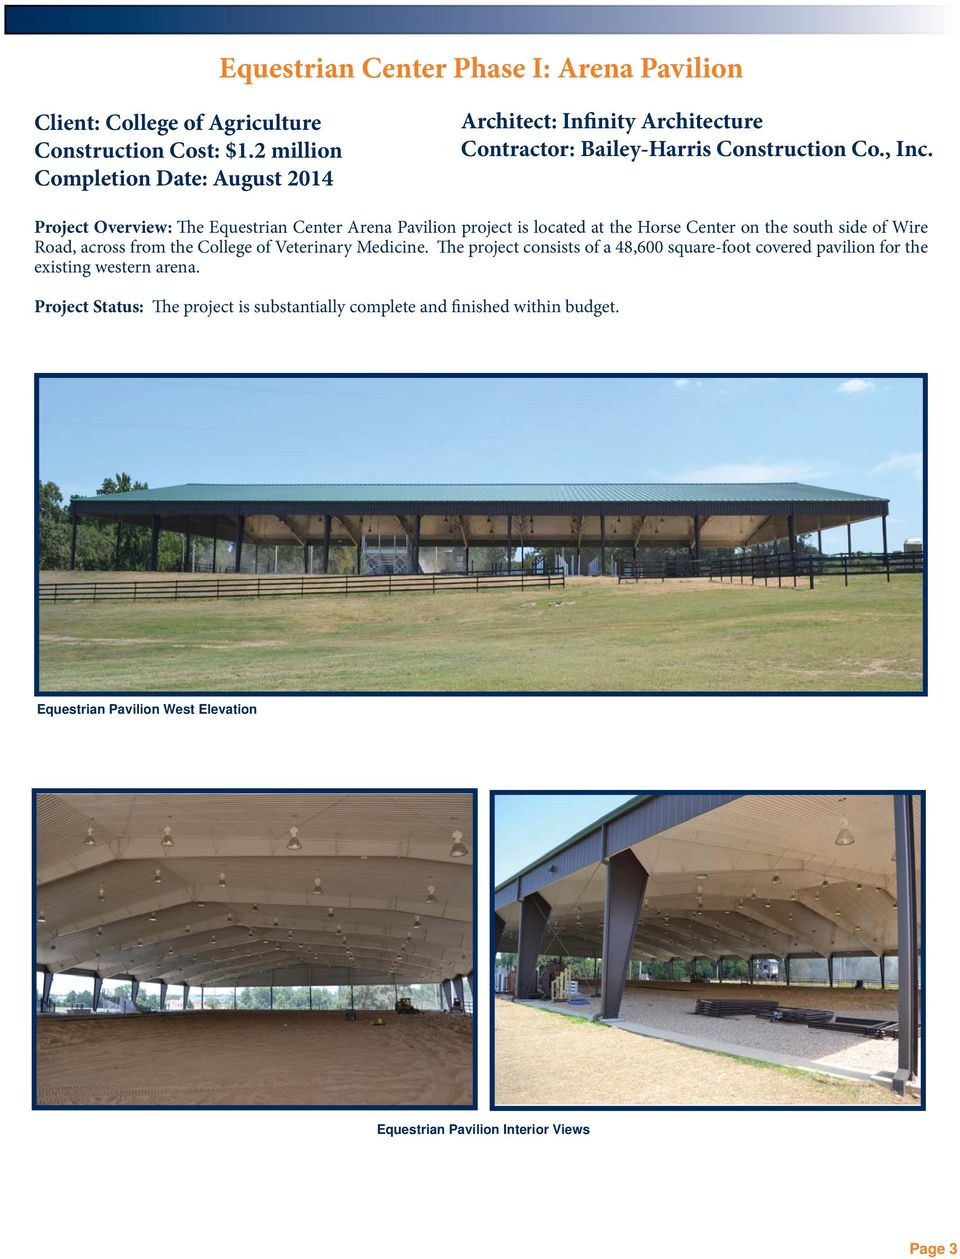 Project Overview: The Equestrian Center Arena Pavilion project is located at the Horse Center on the south side of Wire Road, across from the College of